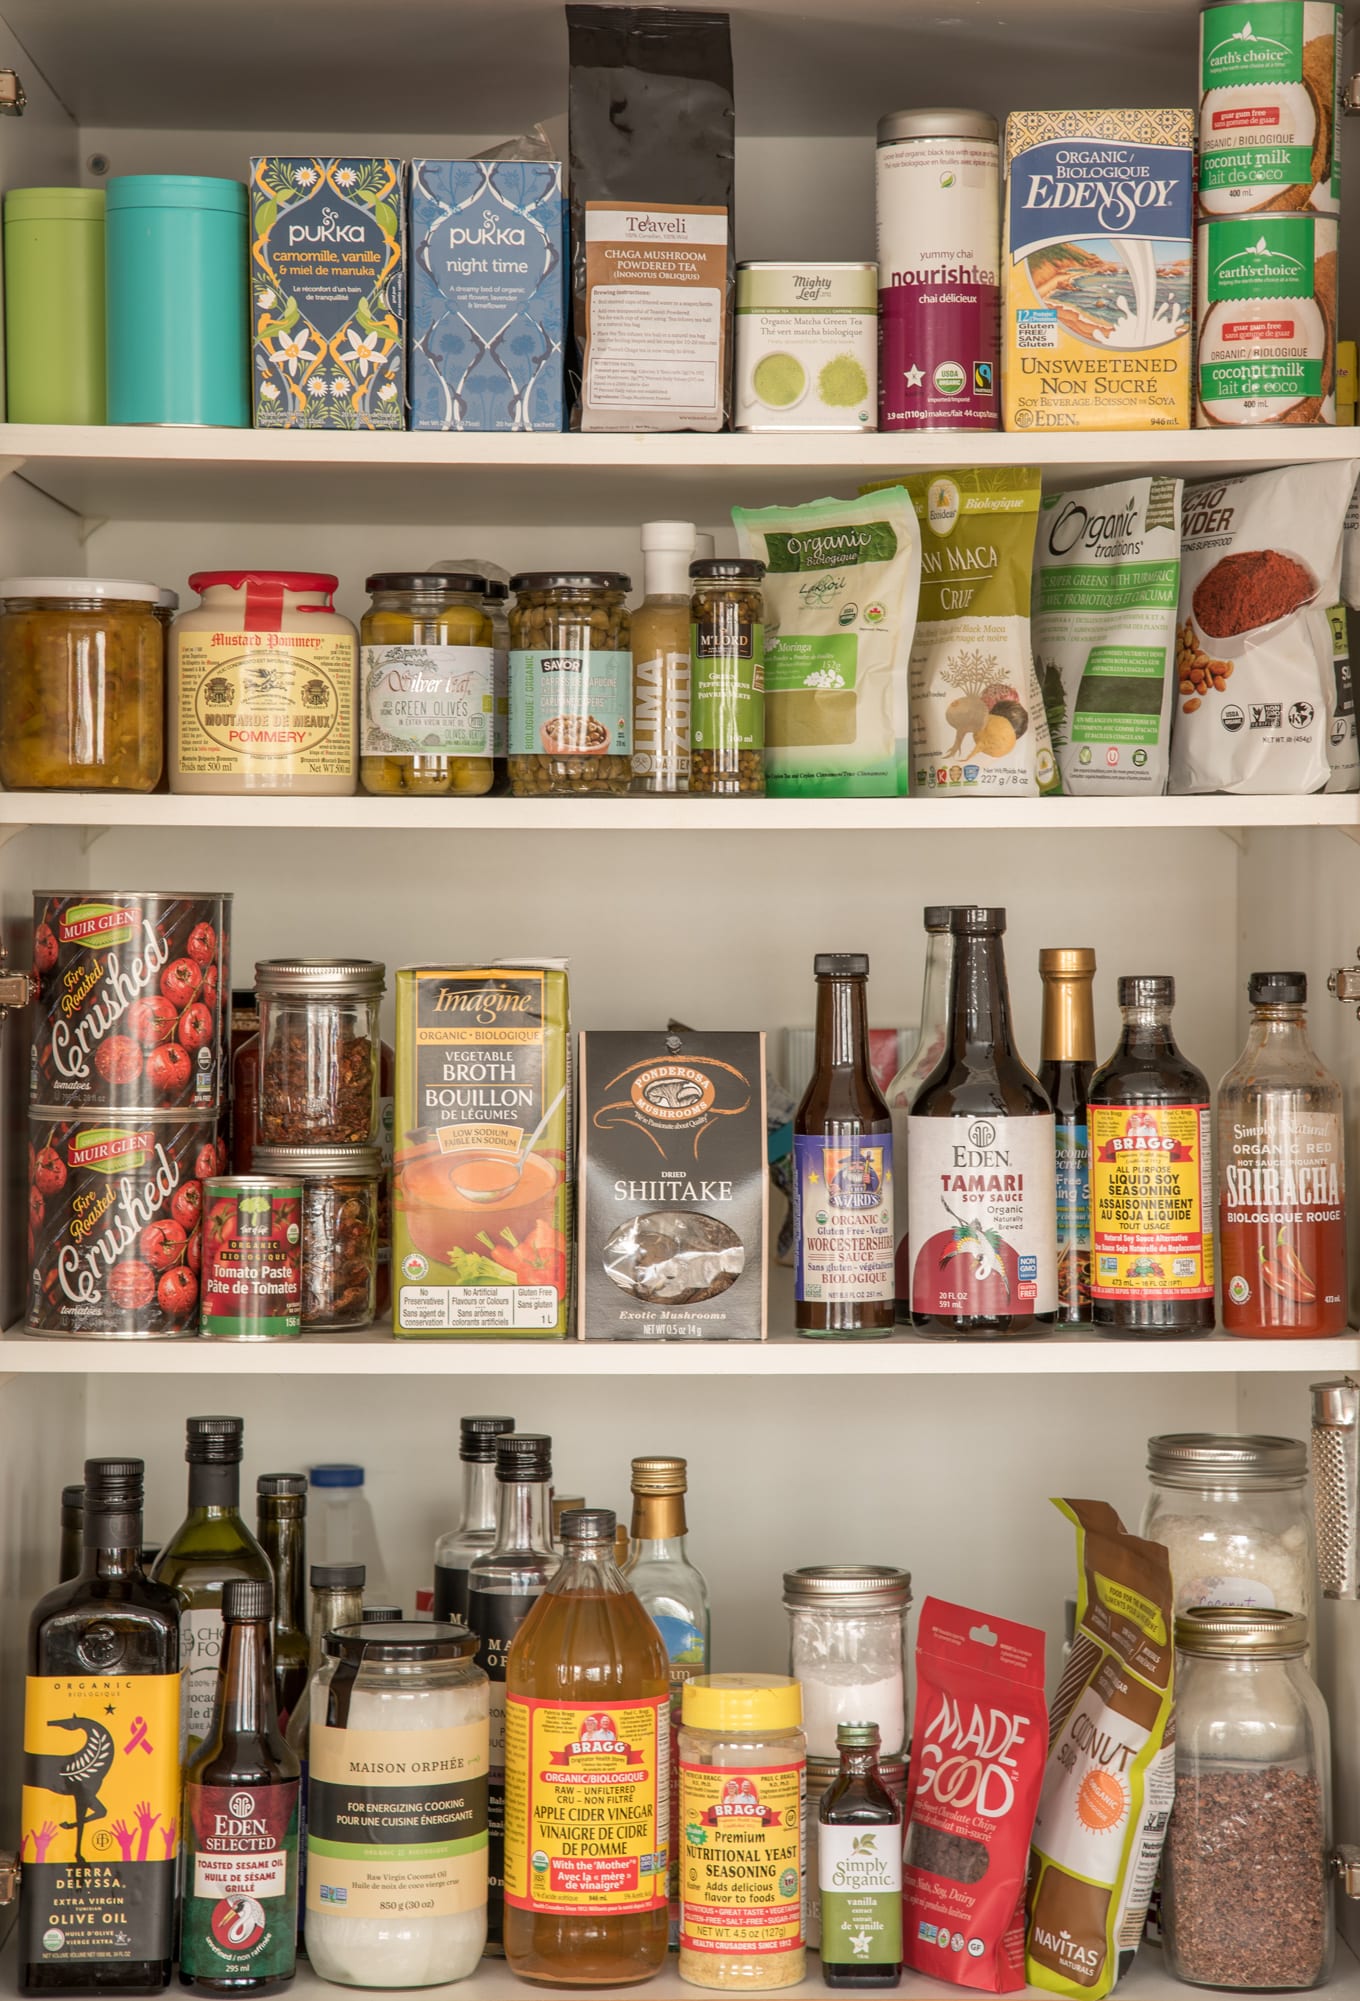 pantry stocked with plant-based items in bottles boxes and bags